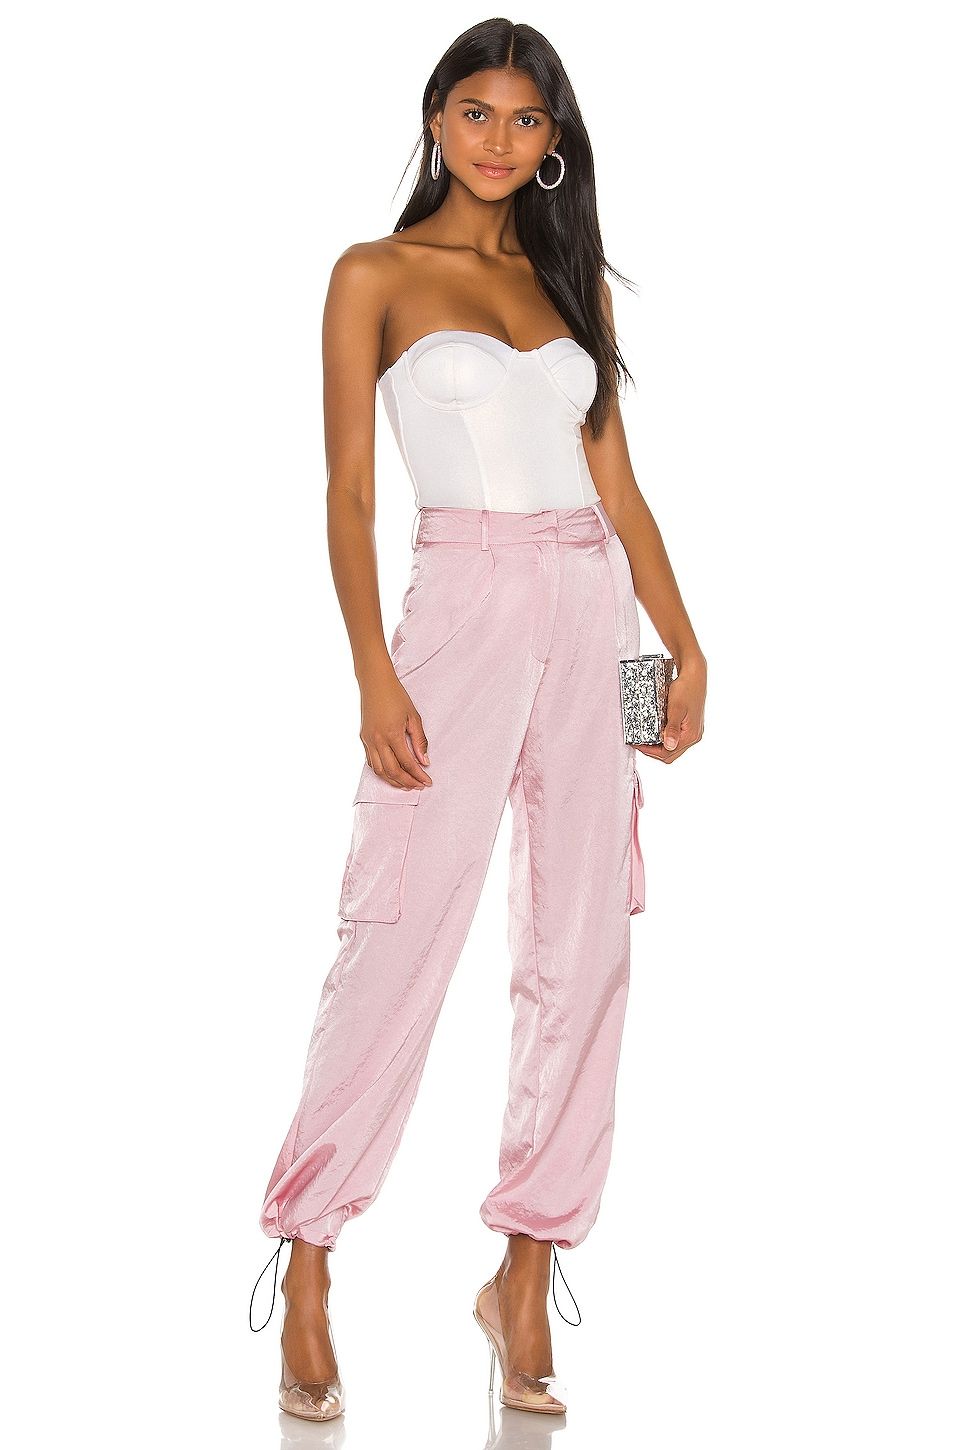 We All Needed Lightweight, Comfy Summer Pants And Found 10 That We Love -  Emily Henderson